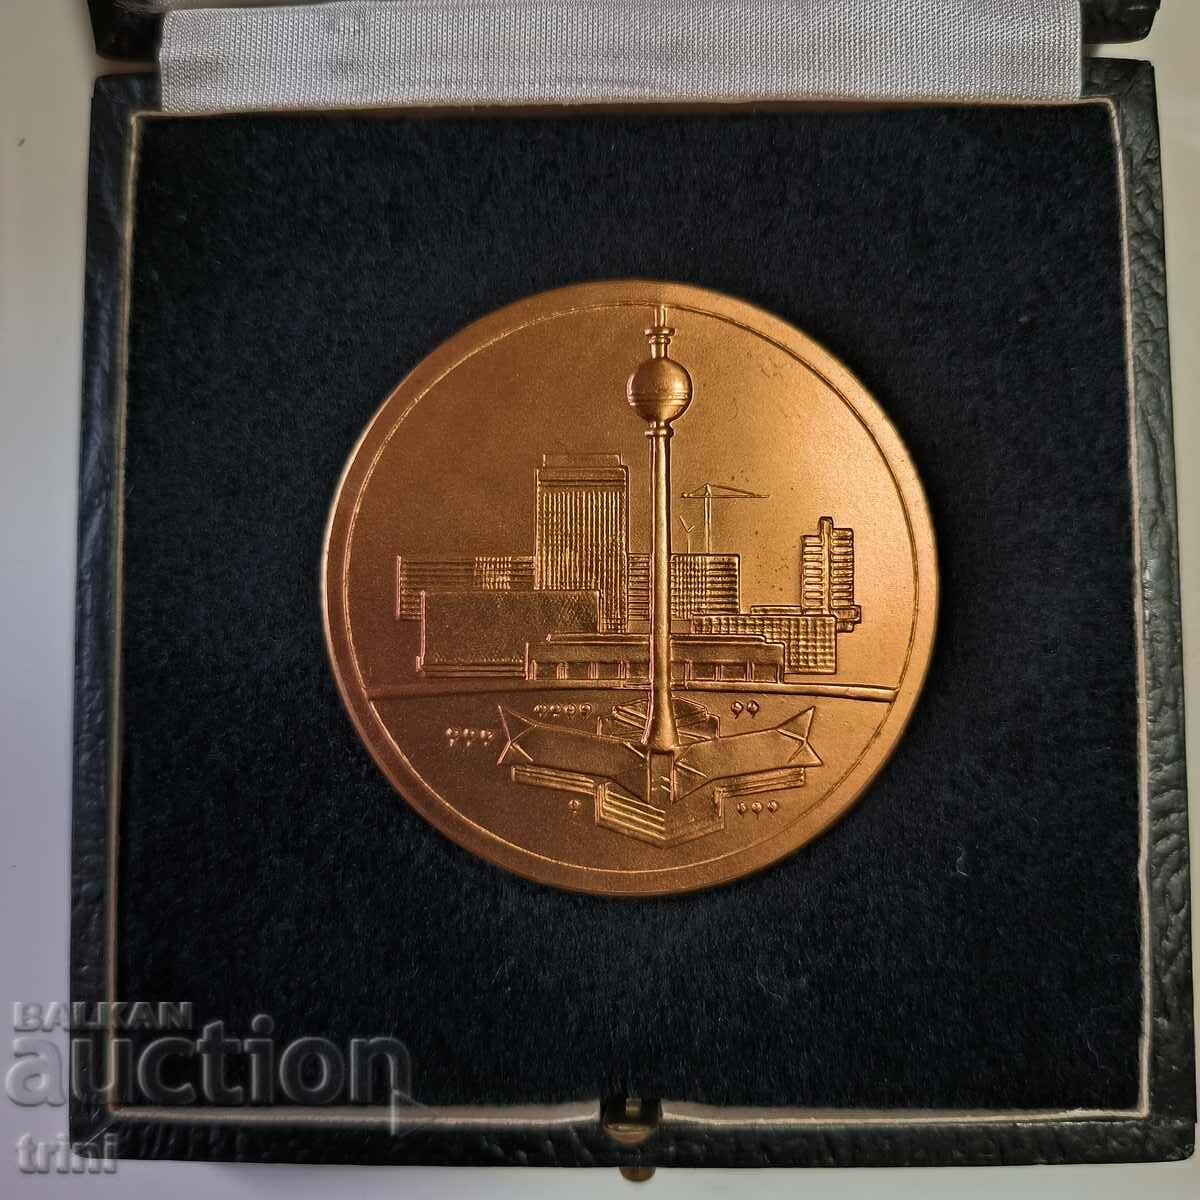 Medal of Honor 1969 "Builders of the Center of Berlin"